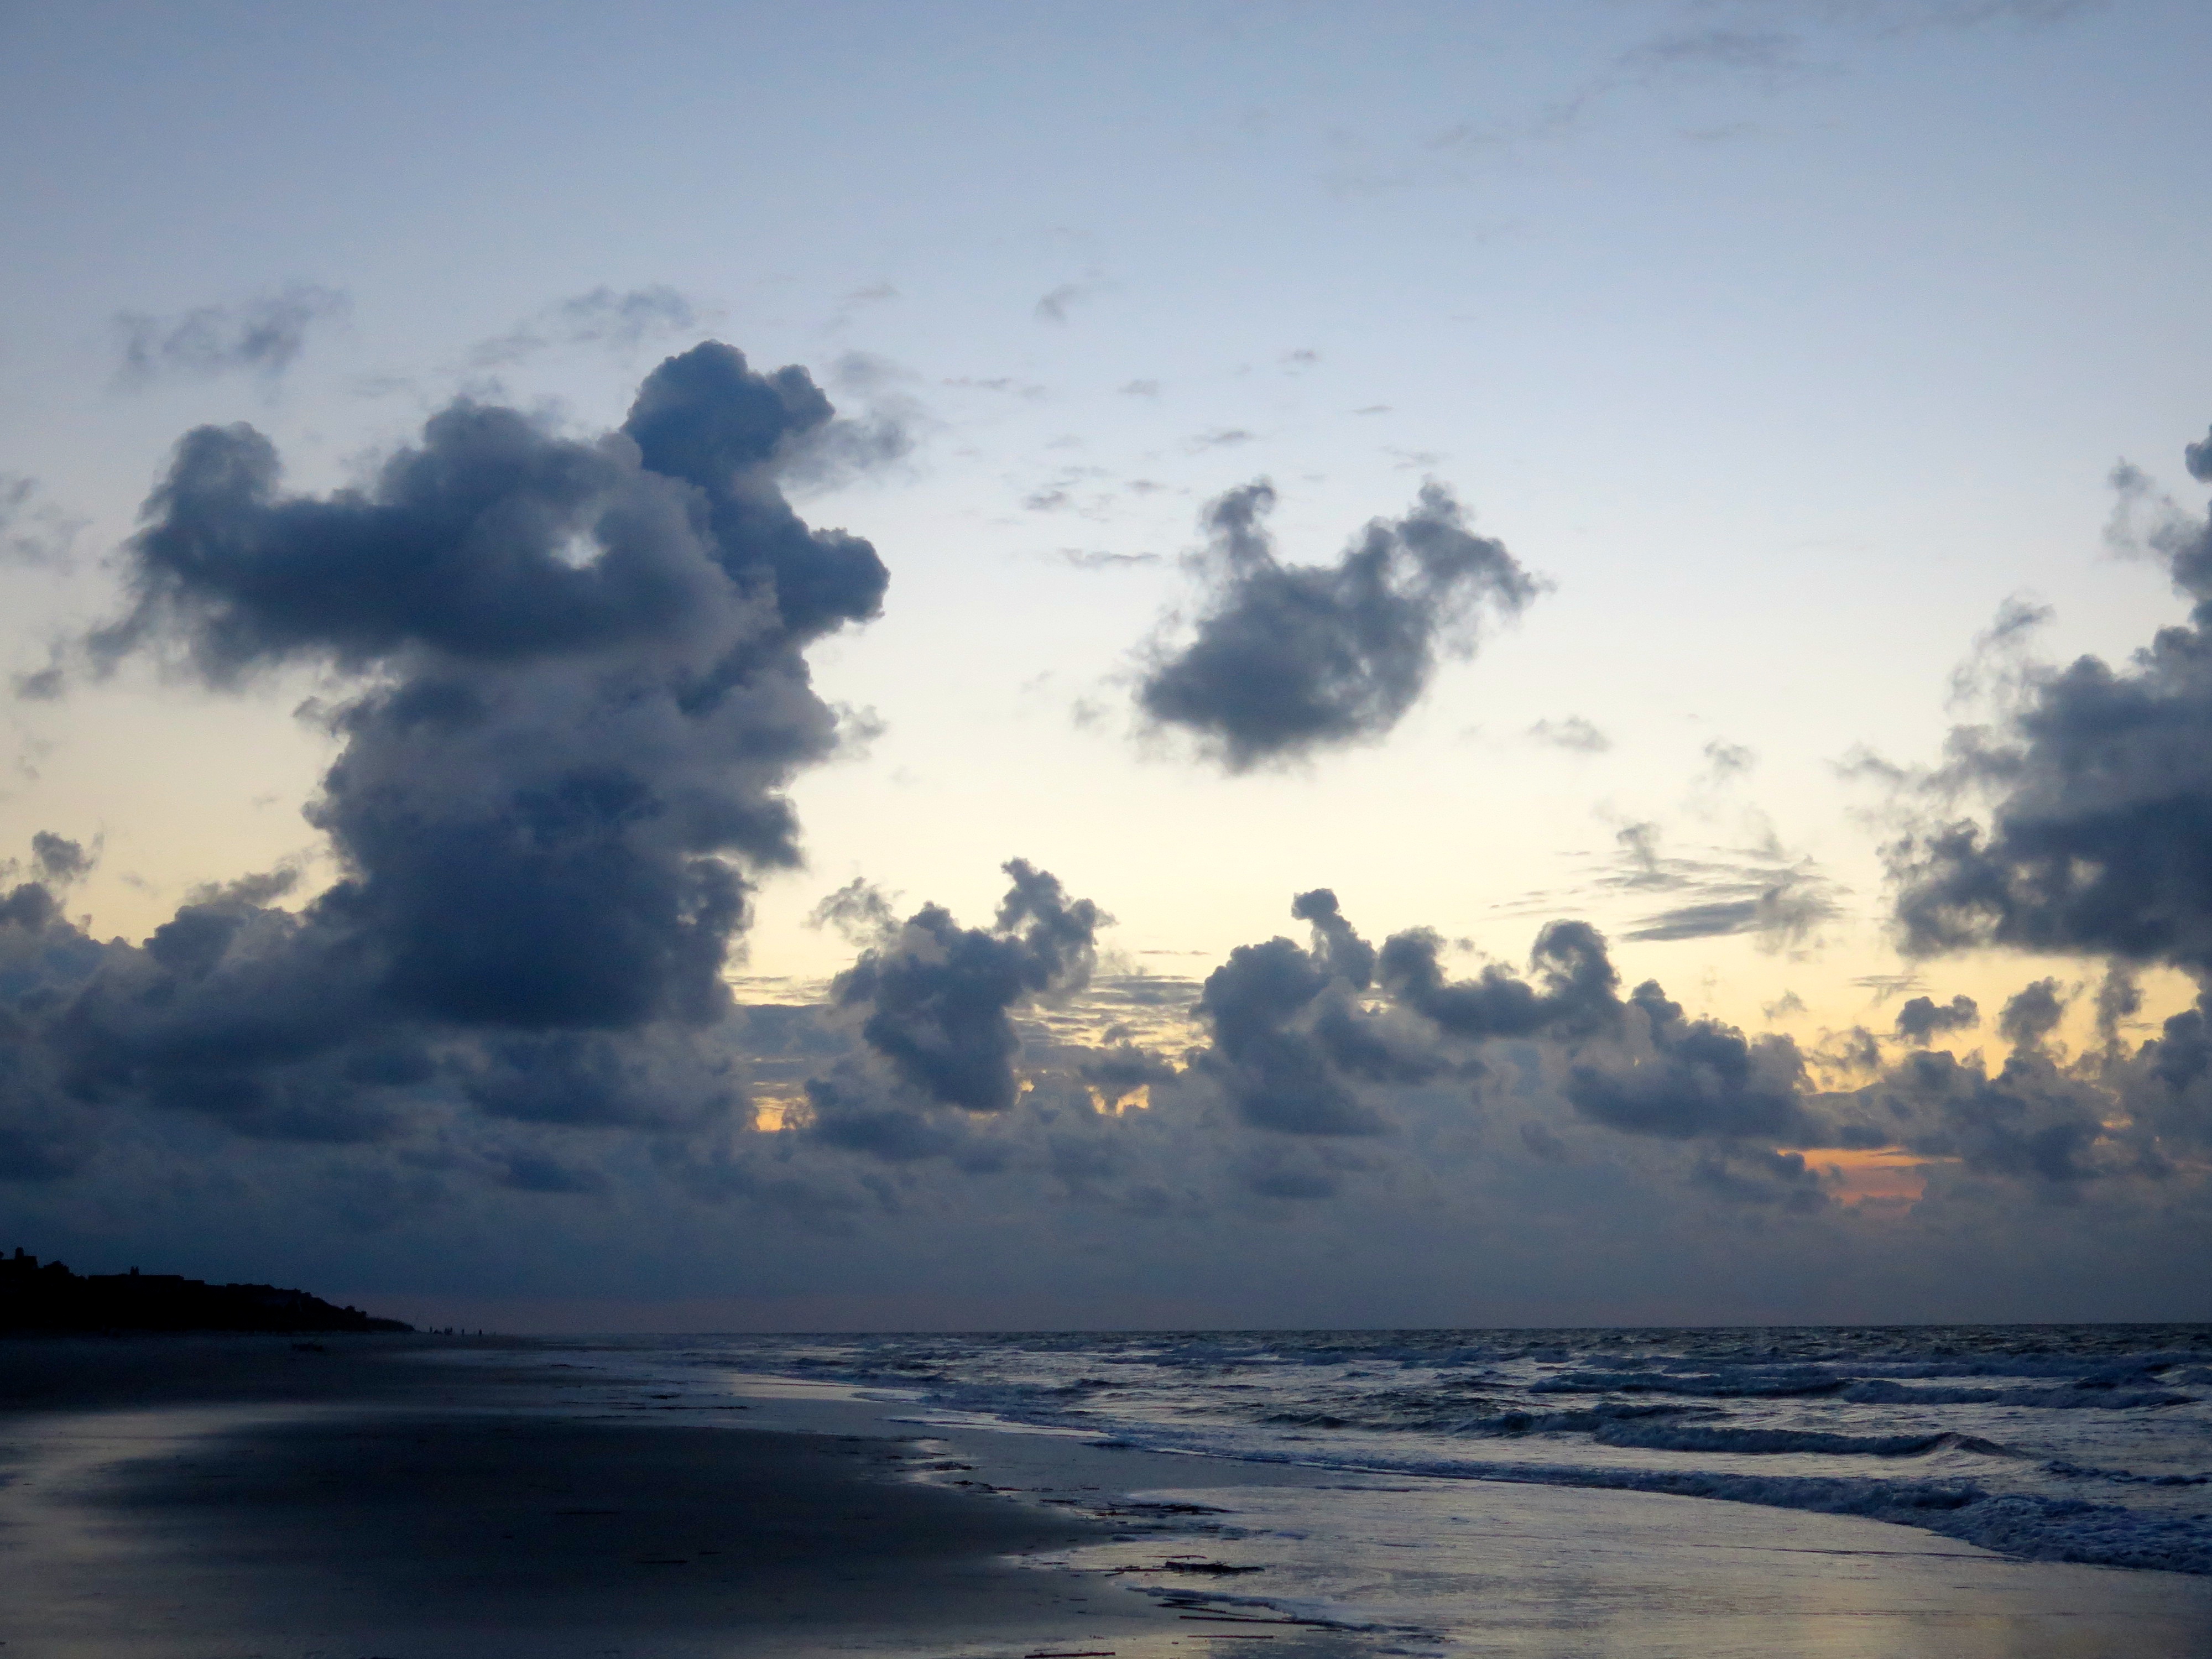 The dark clouds felt just right for my last morning on the beach.